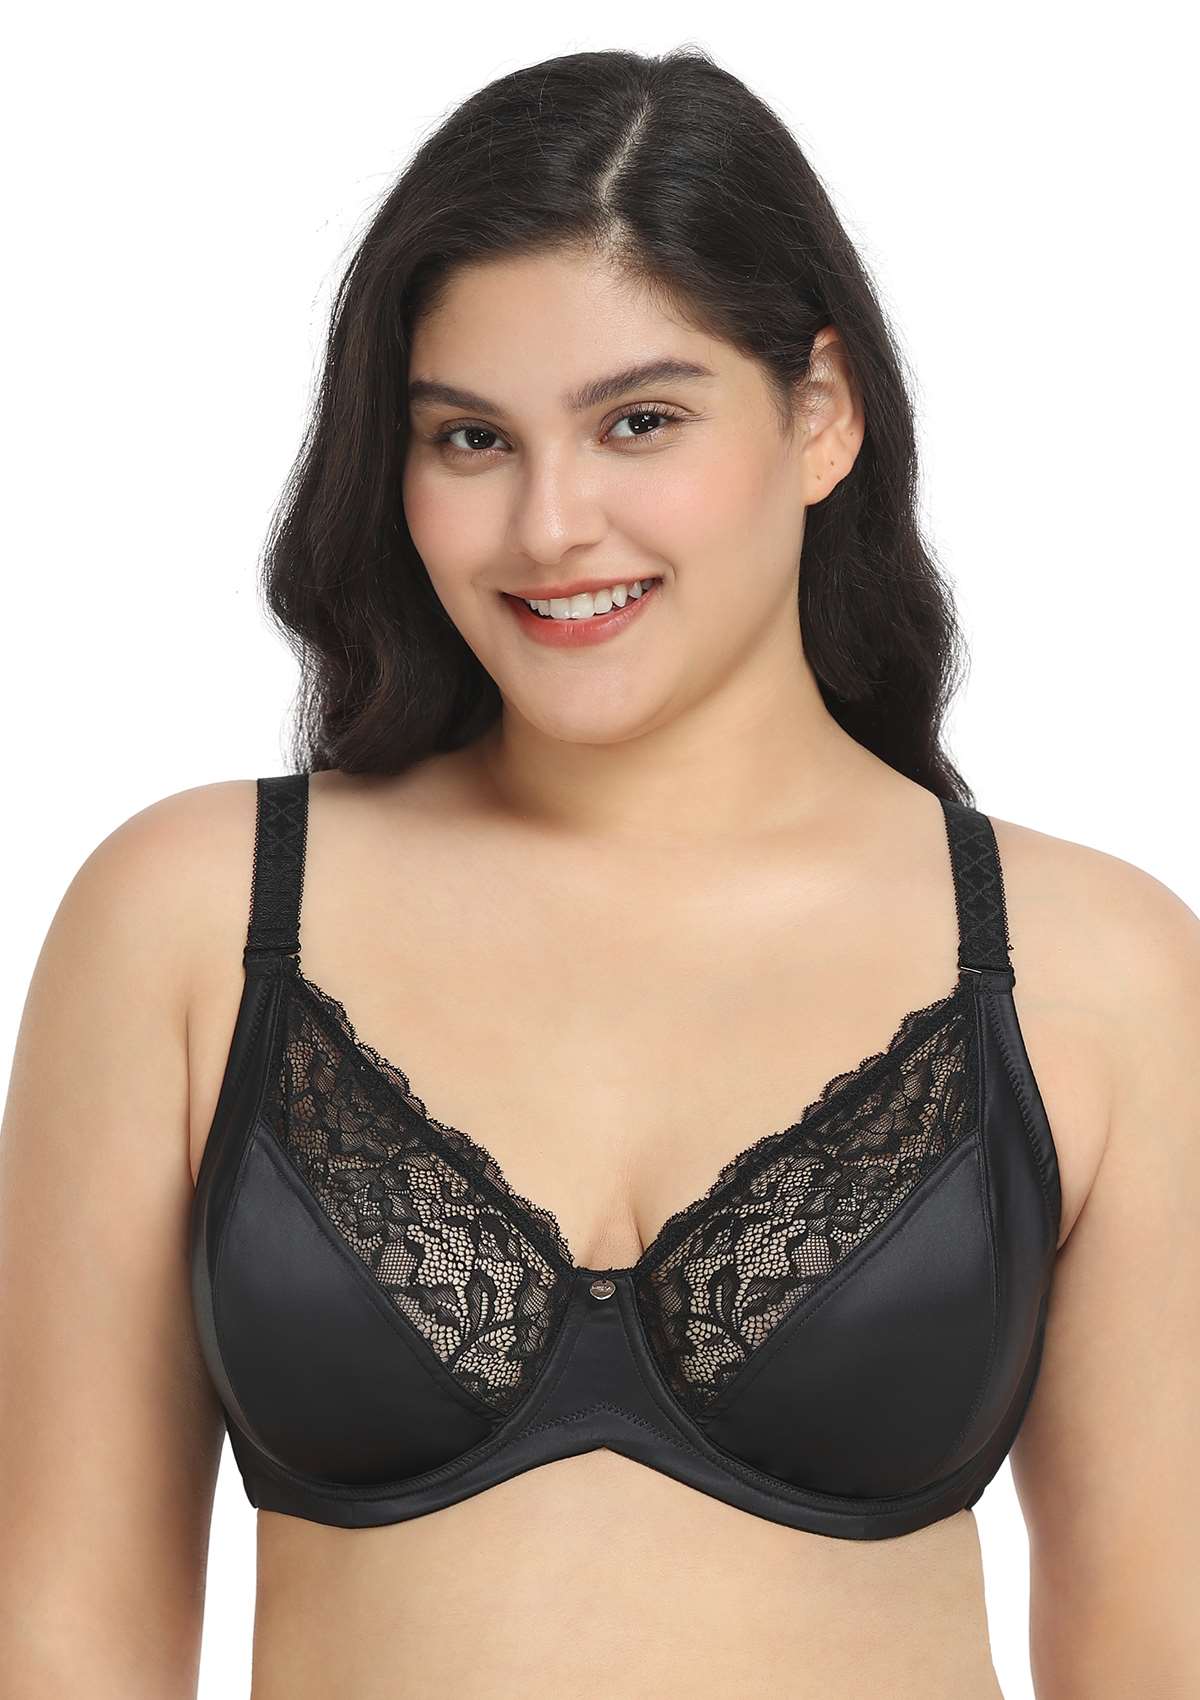 HSIA Foxy Satin Silky Full Coverage Underwire Bra With Floral Lace Trim - Black / 36 / H